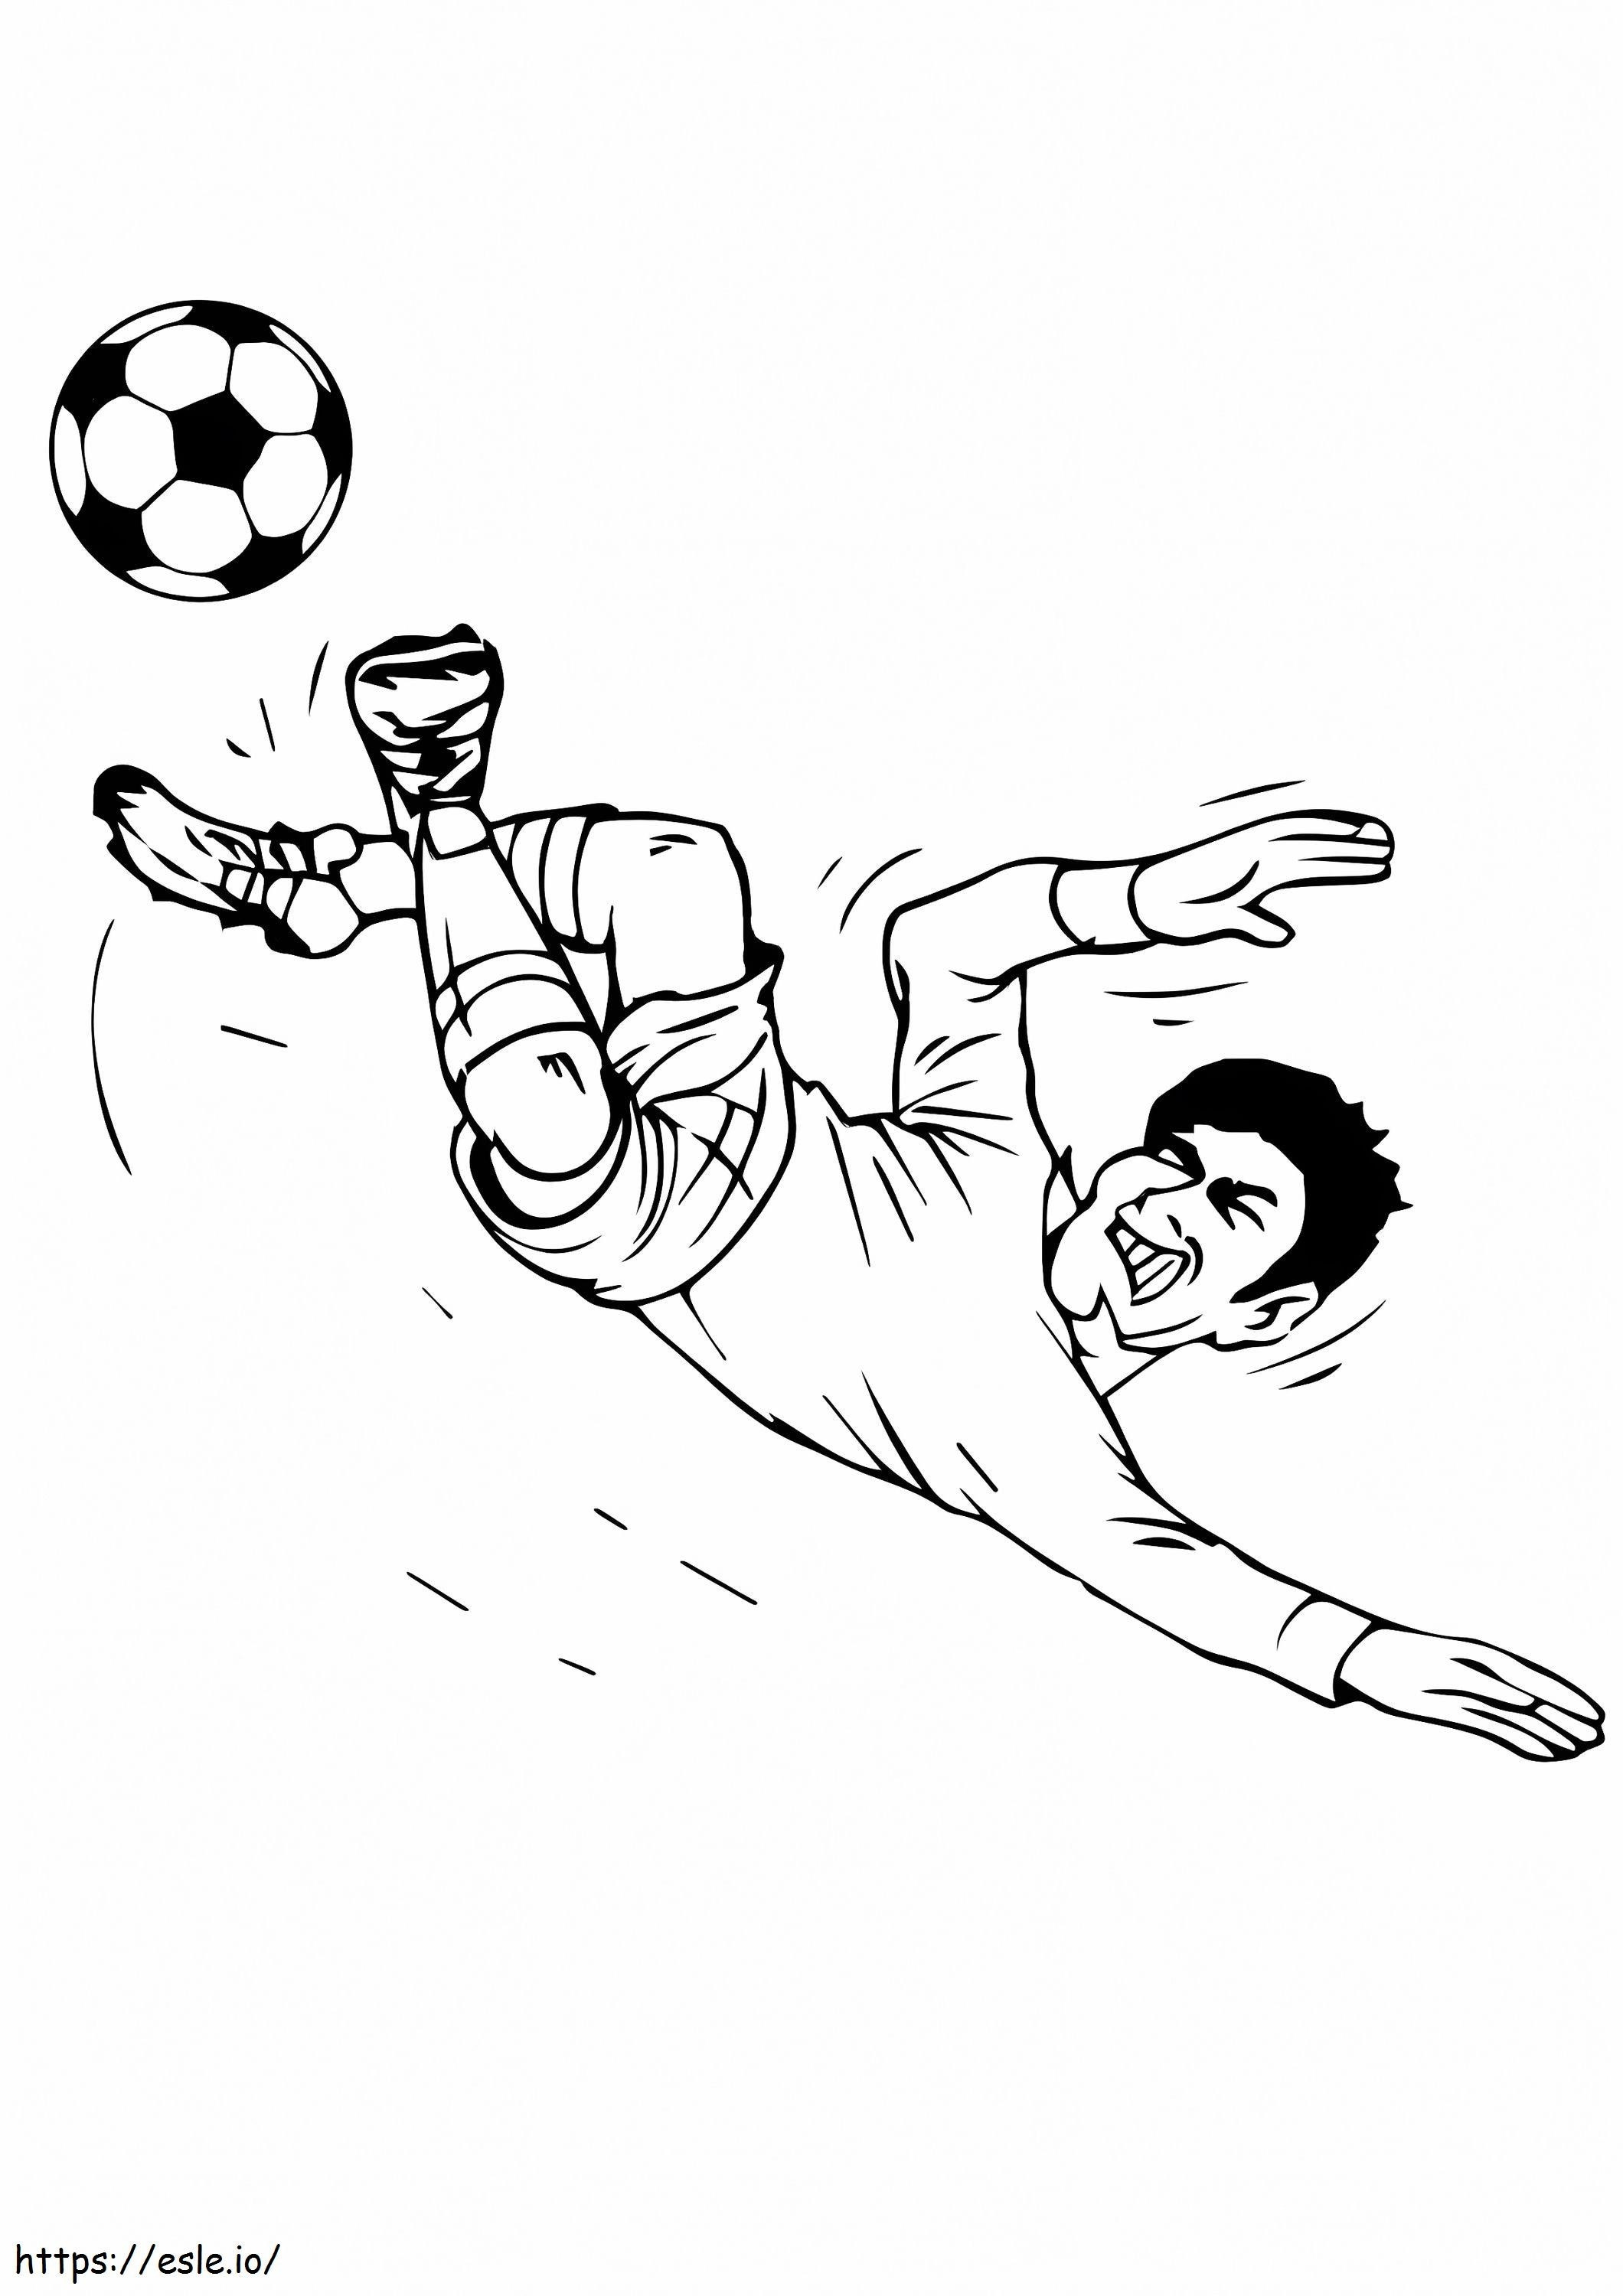 Soccer Player Kicking The Ball coloring page